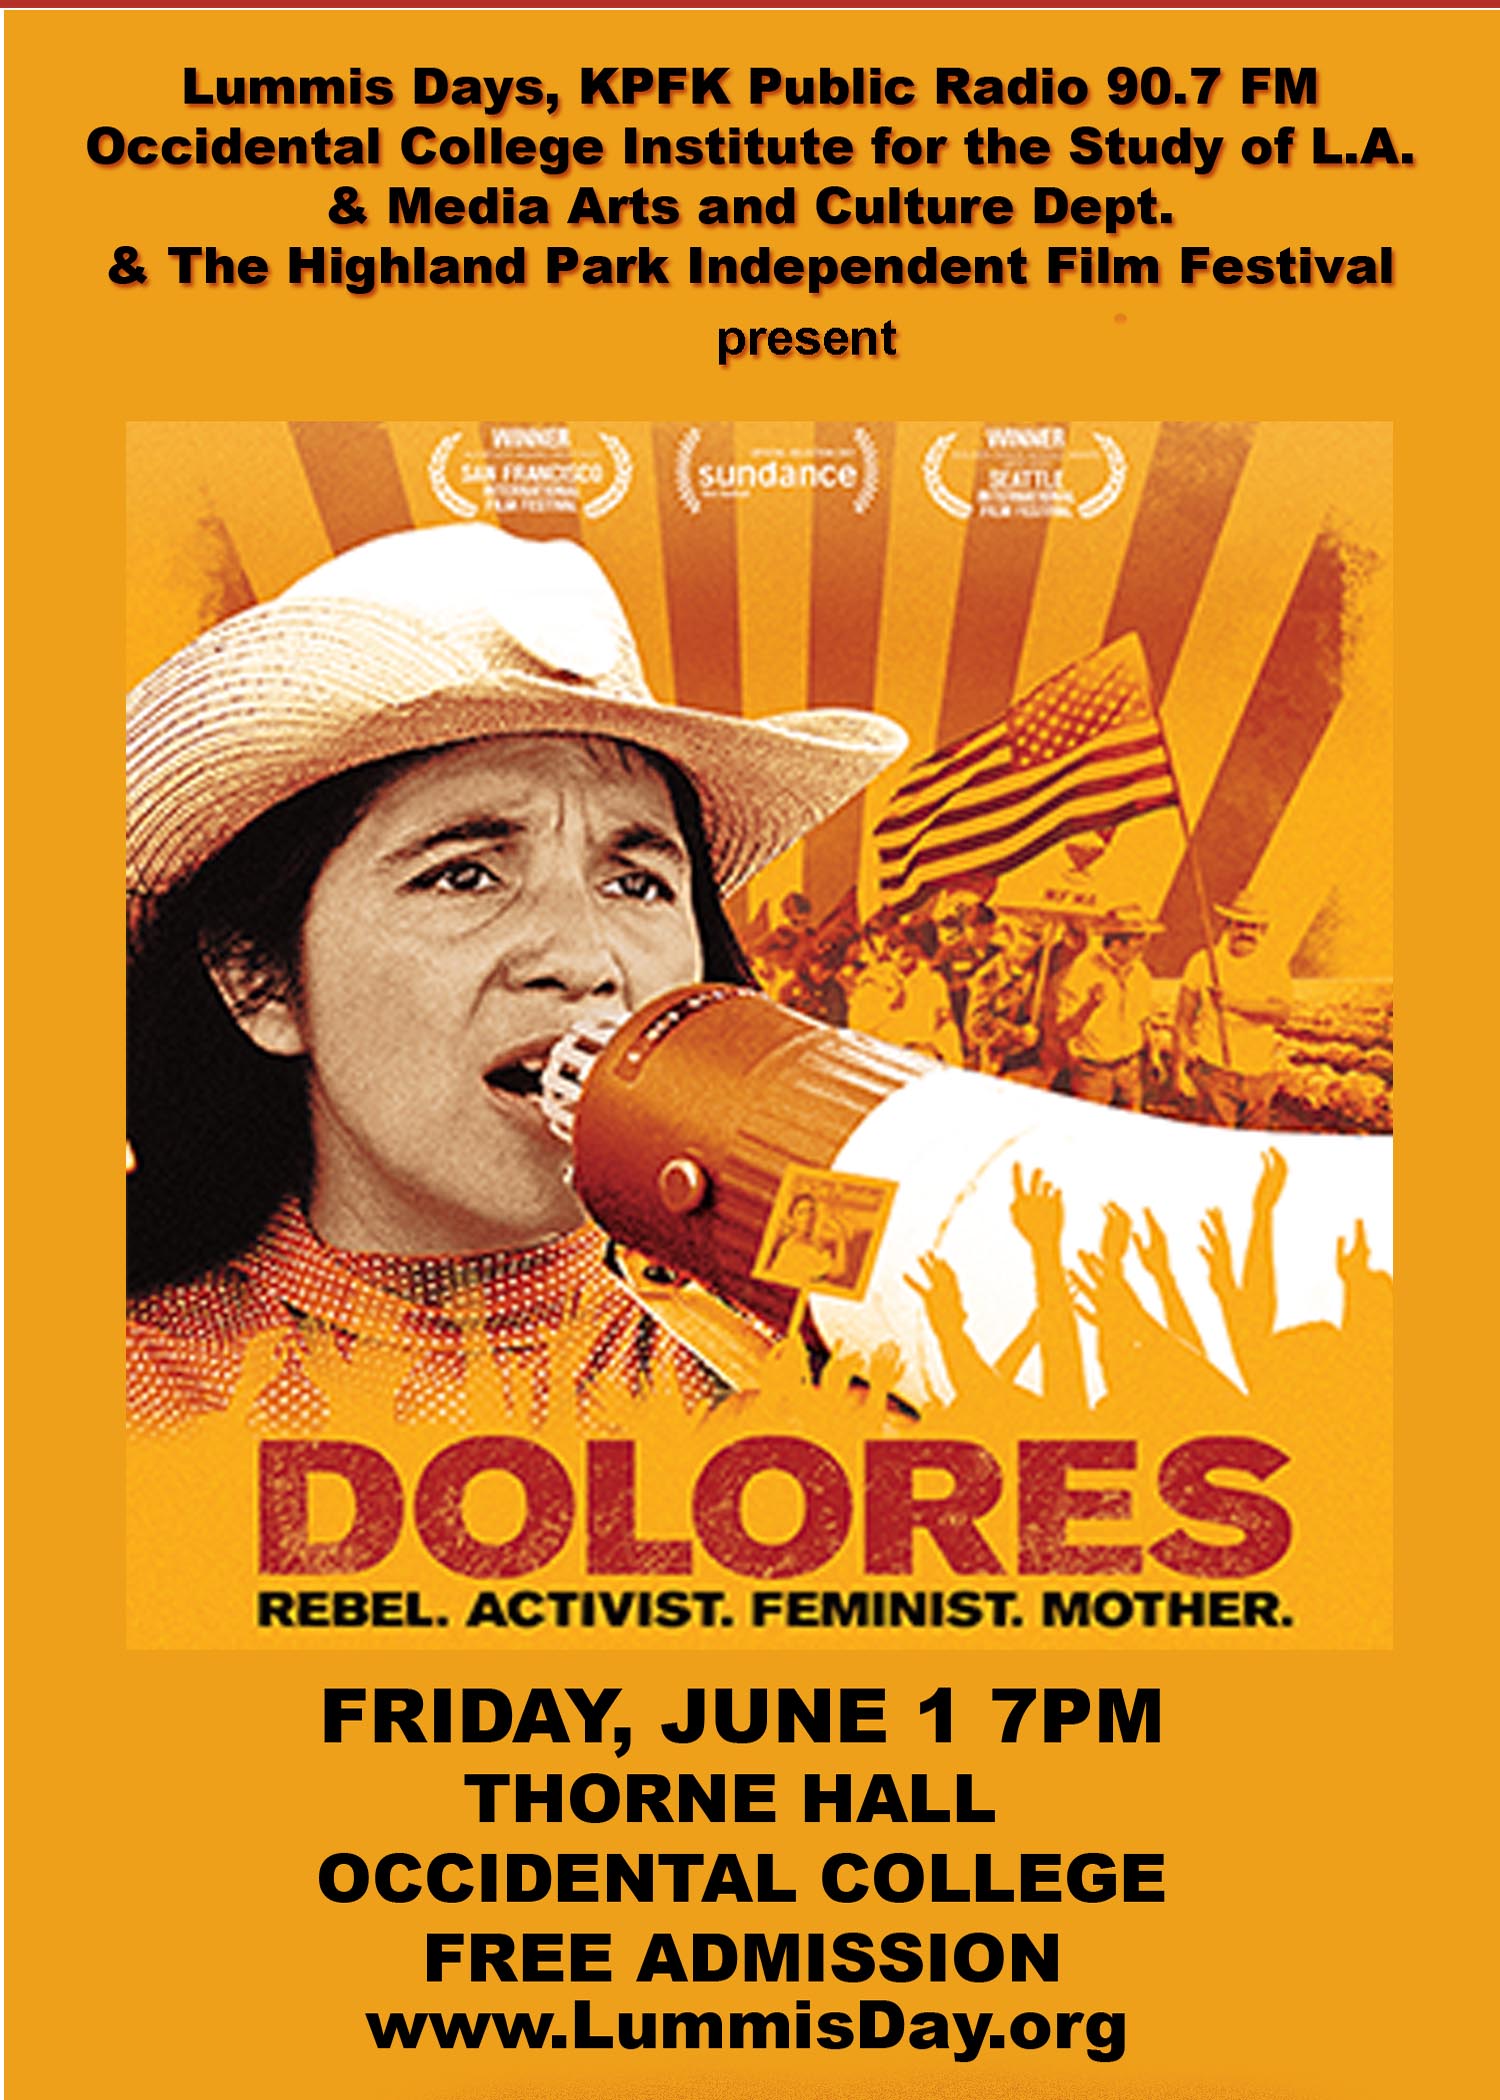 Image for "Dolores" presented by Lummis Days & the Institute